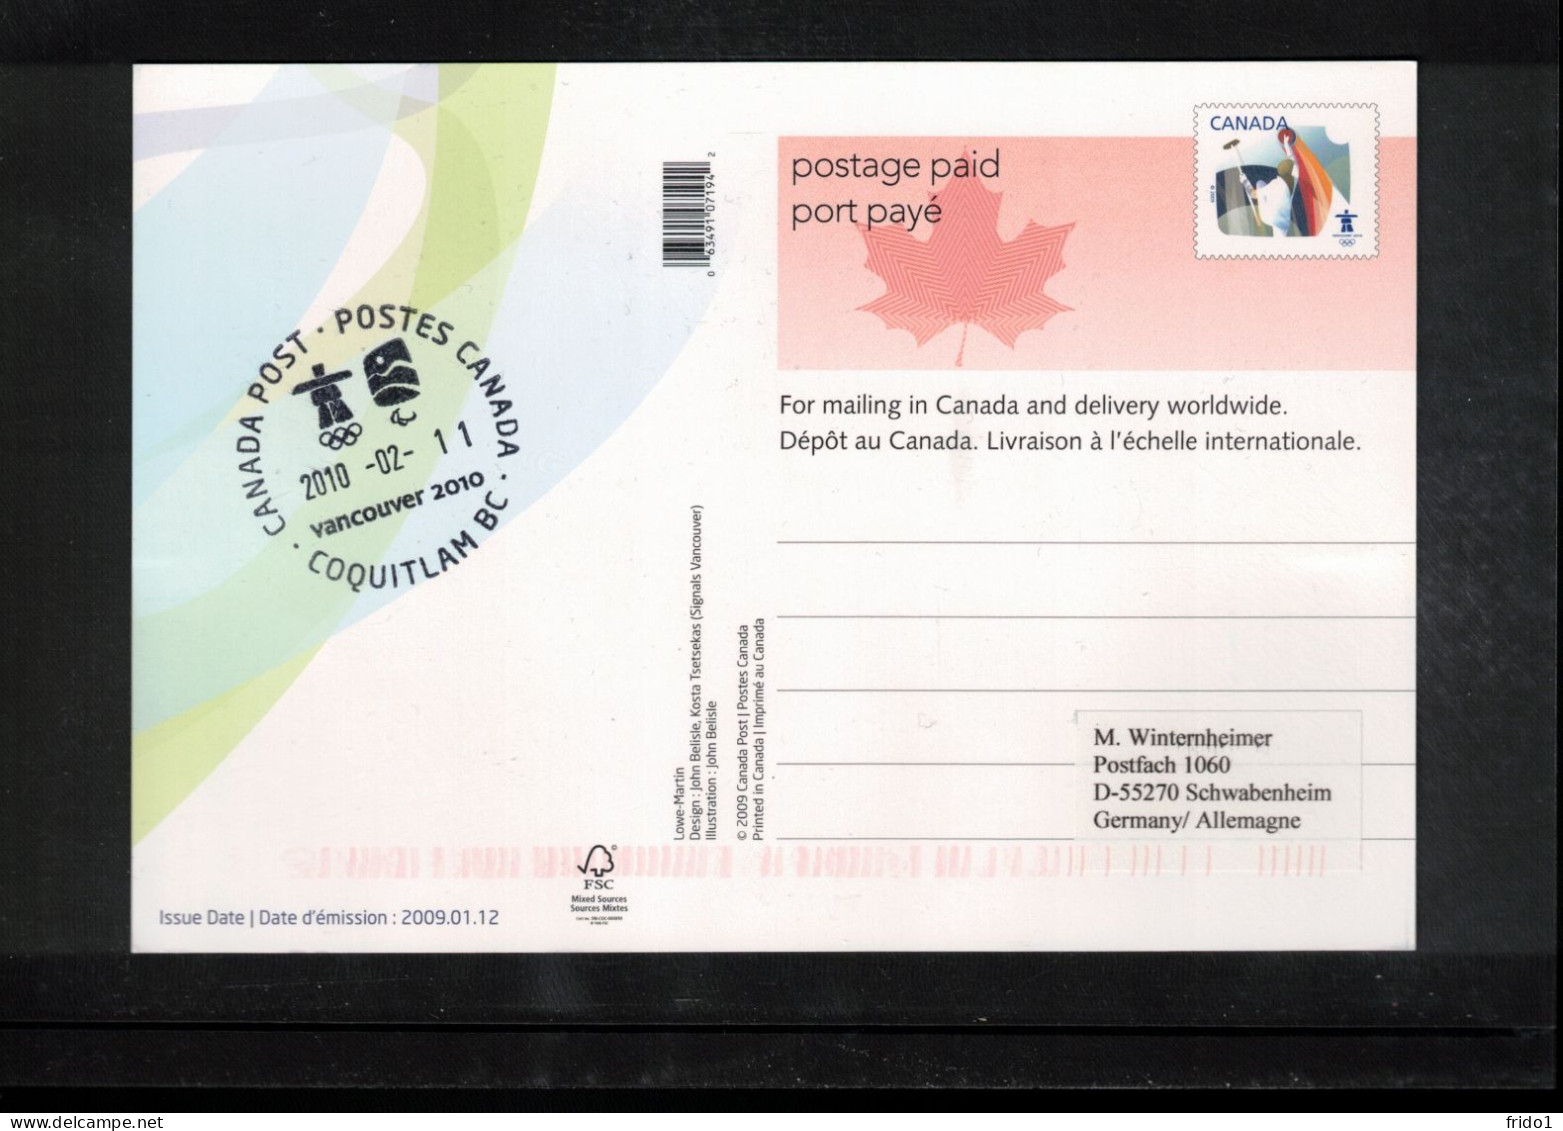 Canada 2010 Olympic Games Vancouver - COQUITLAM BC Postmark Interesting Postcard - Inverno2010: Vancouver